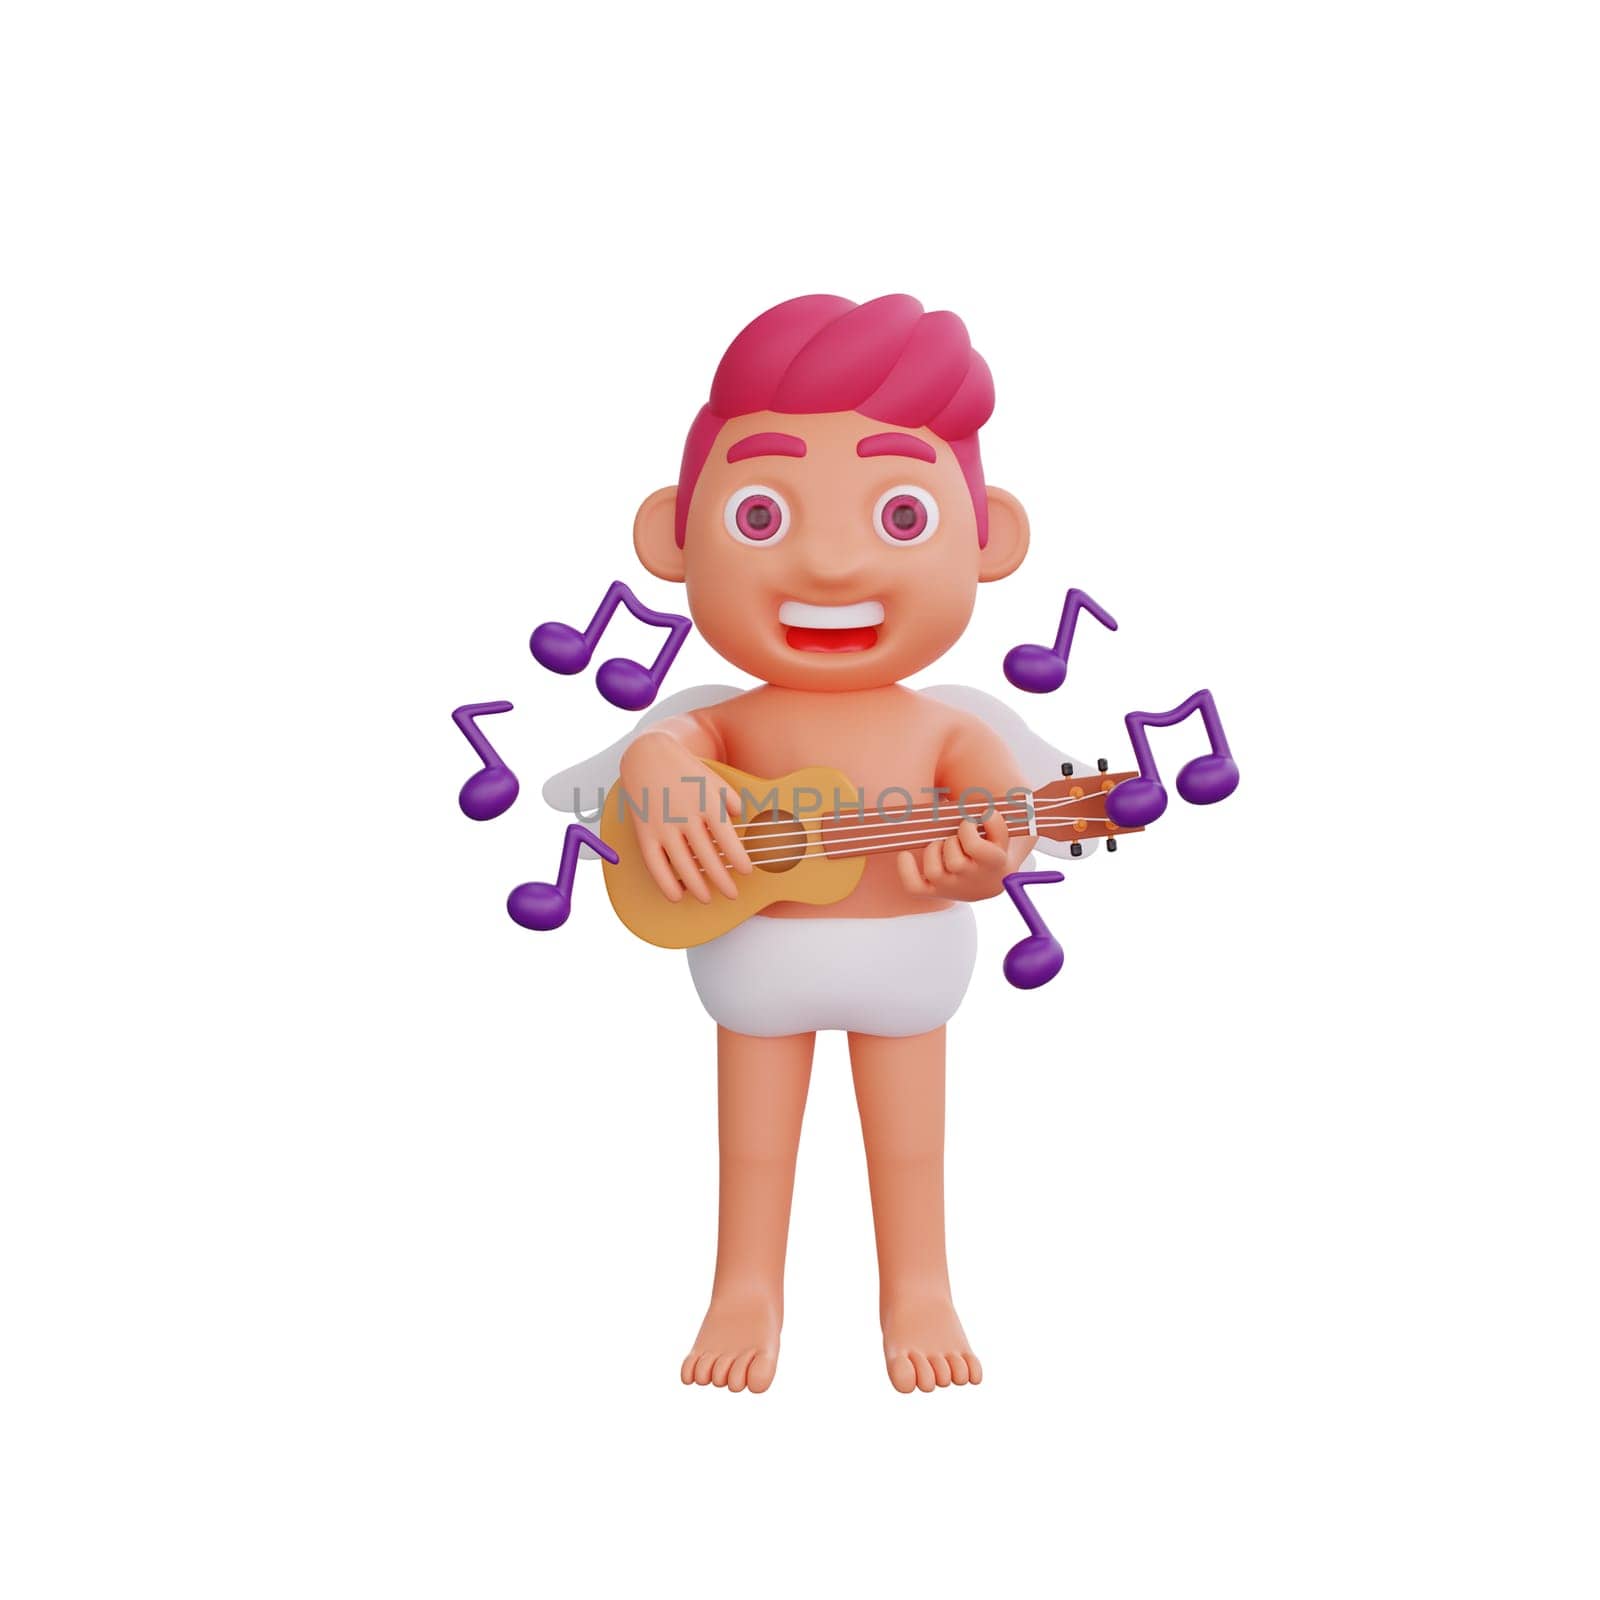 3D illustration of Valentine Cupid character playing a ukulele, surrounded by floating musical notes, capturing the essence of musical joy, perfect for Valentine or love themed projects